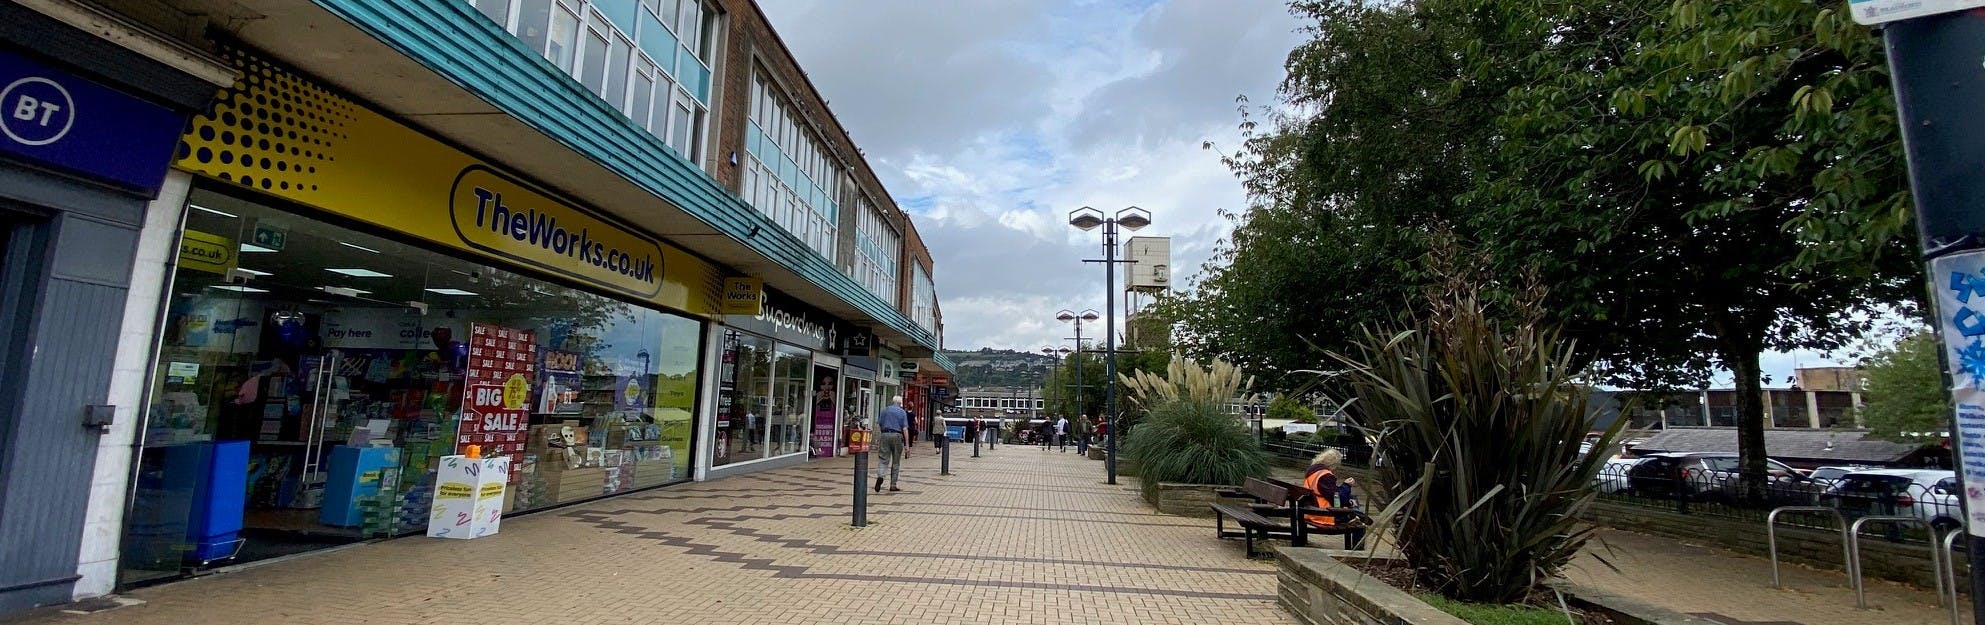 View of Shipley market square and clock tower